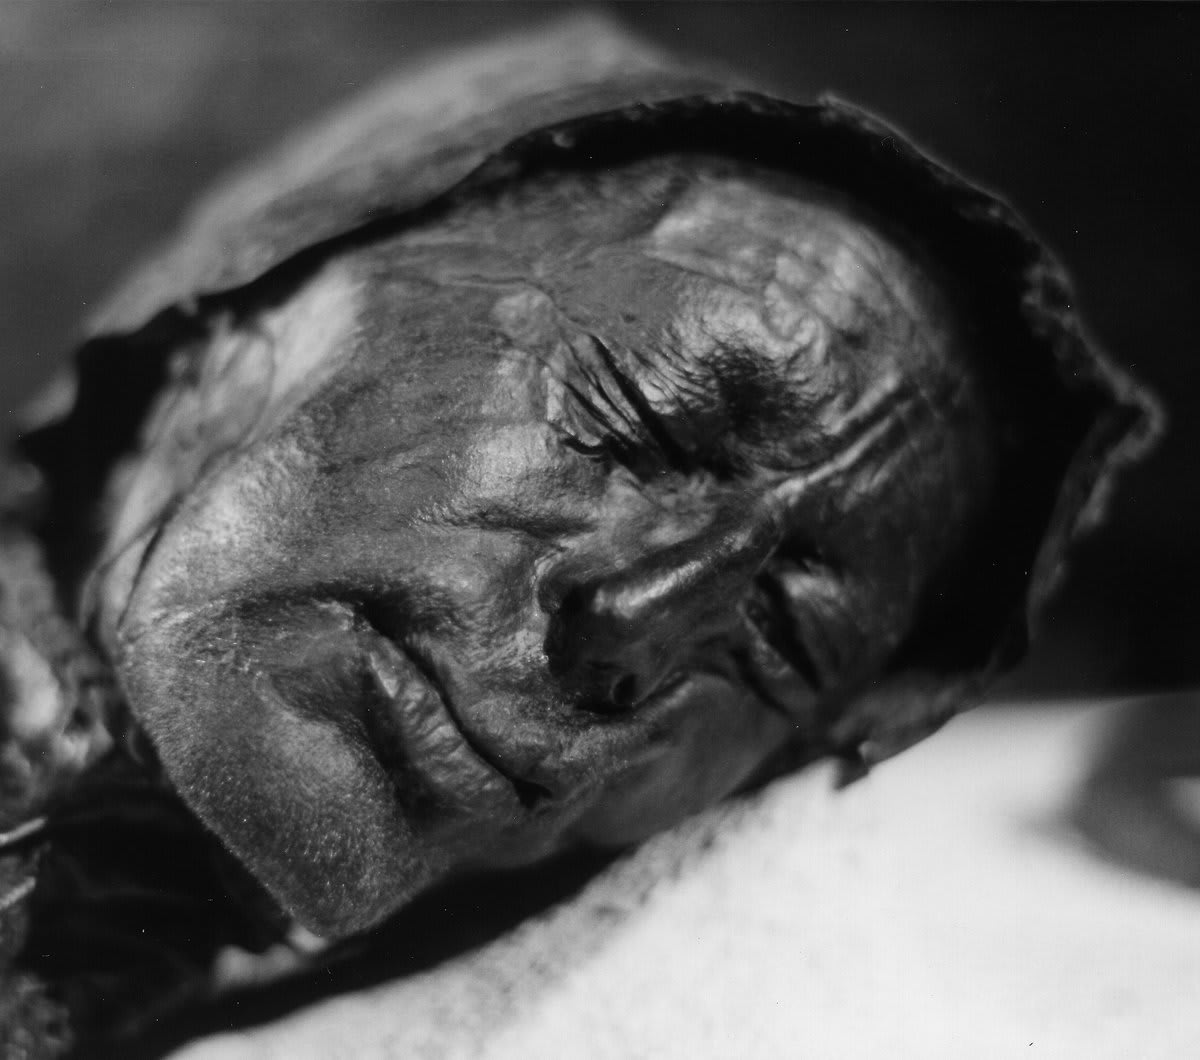 We know it's hard to believe, but this man was buried 2400 years ago. ☠️ Called the Tollund Man, he was found in a peat bog - a 'bog body'. He's well preserved because of the acidic water, low temps, and no oxygen. Read more: https://t.co/c6DVudJrf0 📷: Sven Rosborn